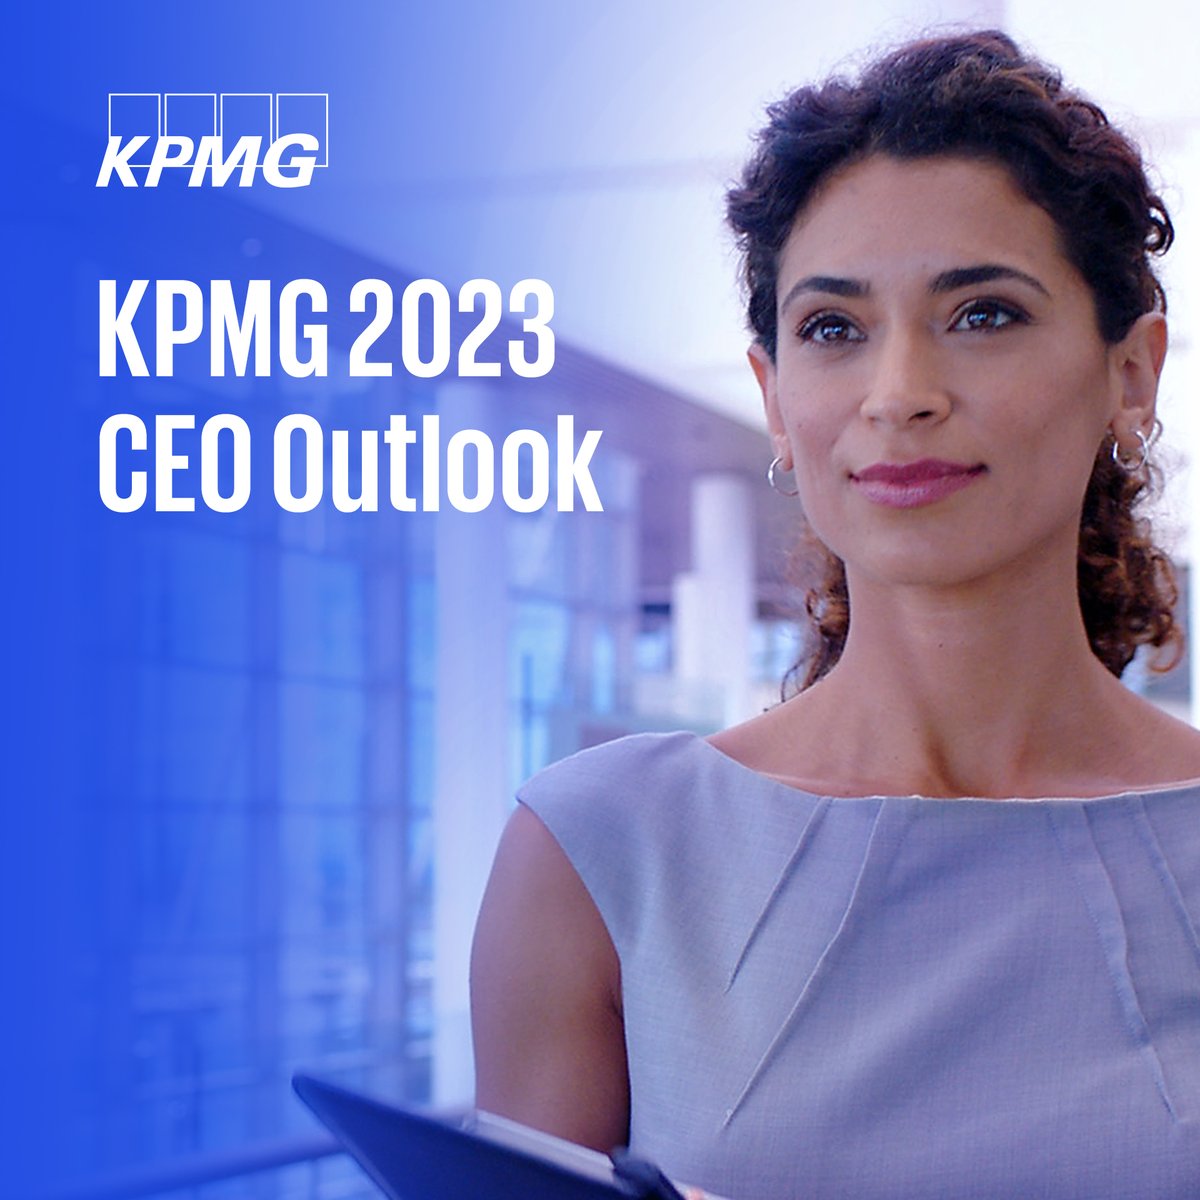 Global CEOs continue to face complex challenges to maintain growth and resilience. Read how they are steering their organizations through economic pressures, disruptive tech and increased ESG expectations in our latest #CEOoutlook: social.kpmg/1ylyfp